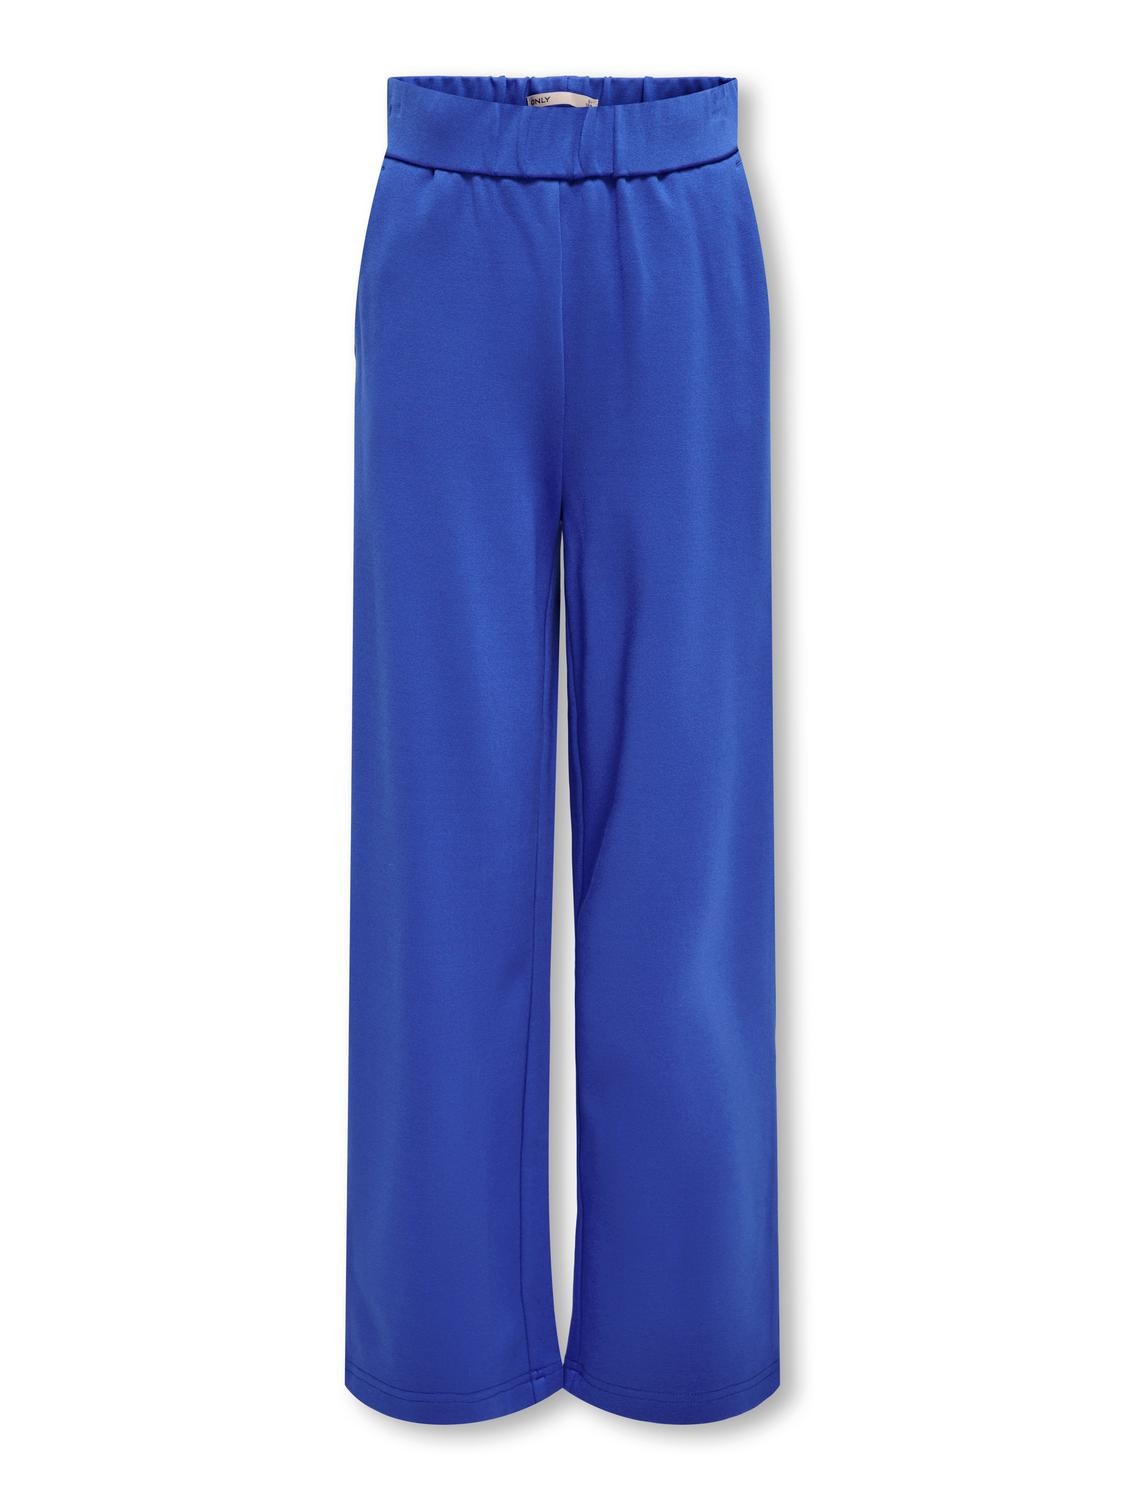 ONLY Loose Fit Trousers -Dazzling Blue - 15316379